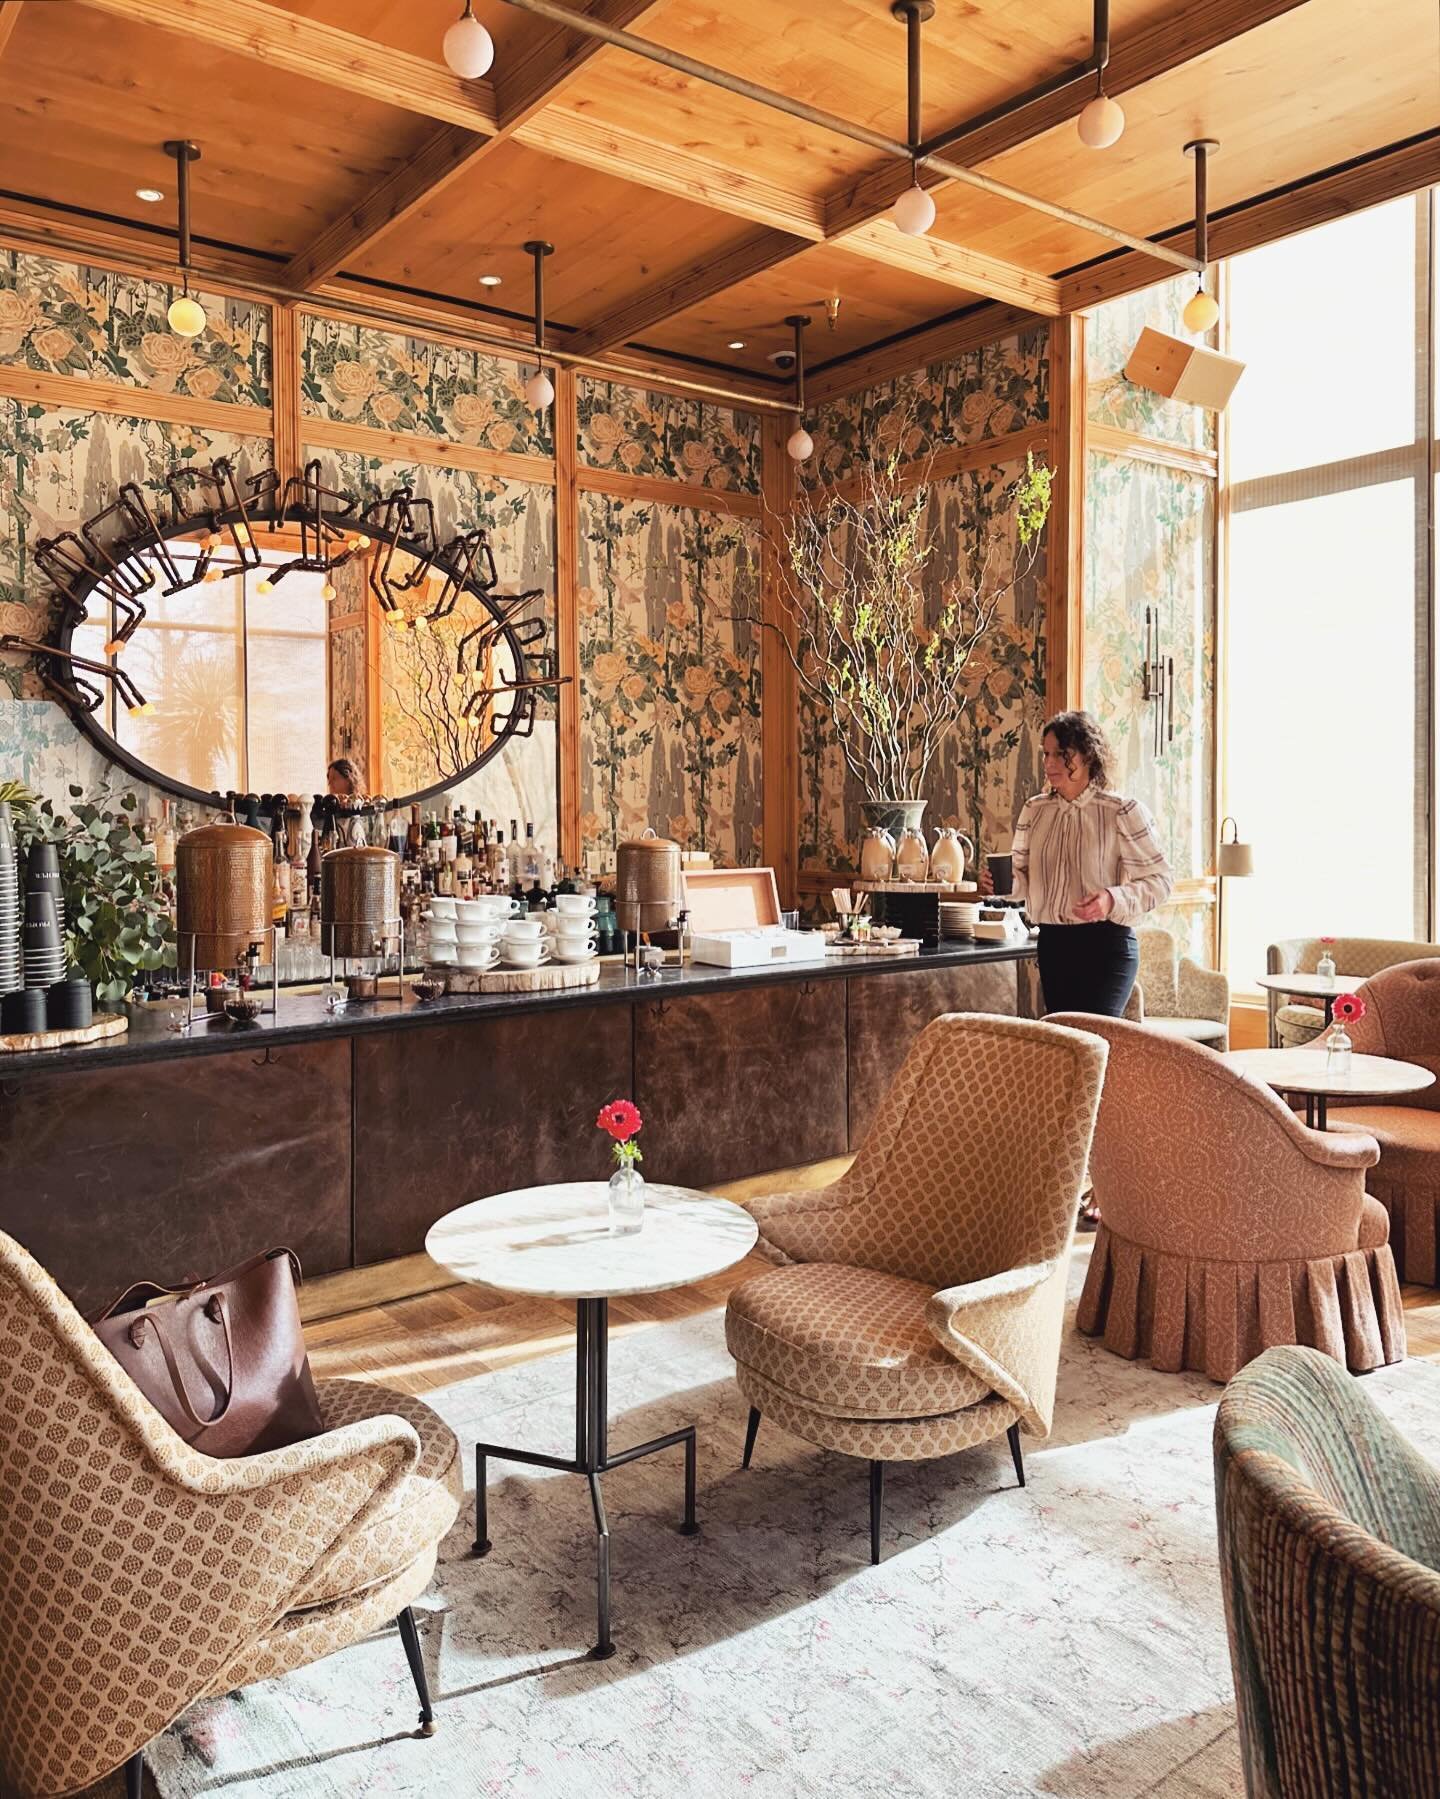 From my most recent trip to Austin, endless inspiration and morning lattes here. @austinproperhotel #designinspo #wallpaper #morningvibes #cafedesign #interiors #austin